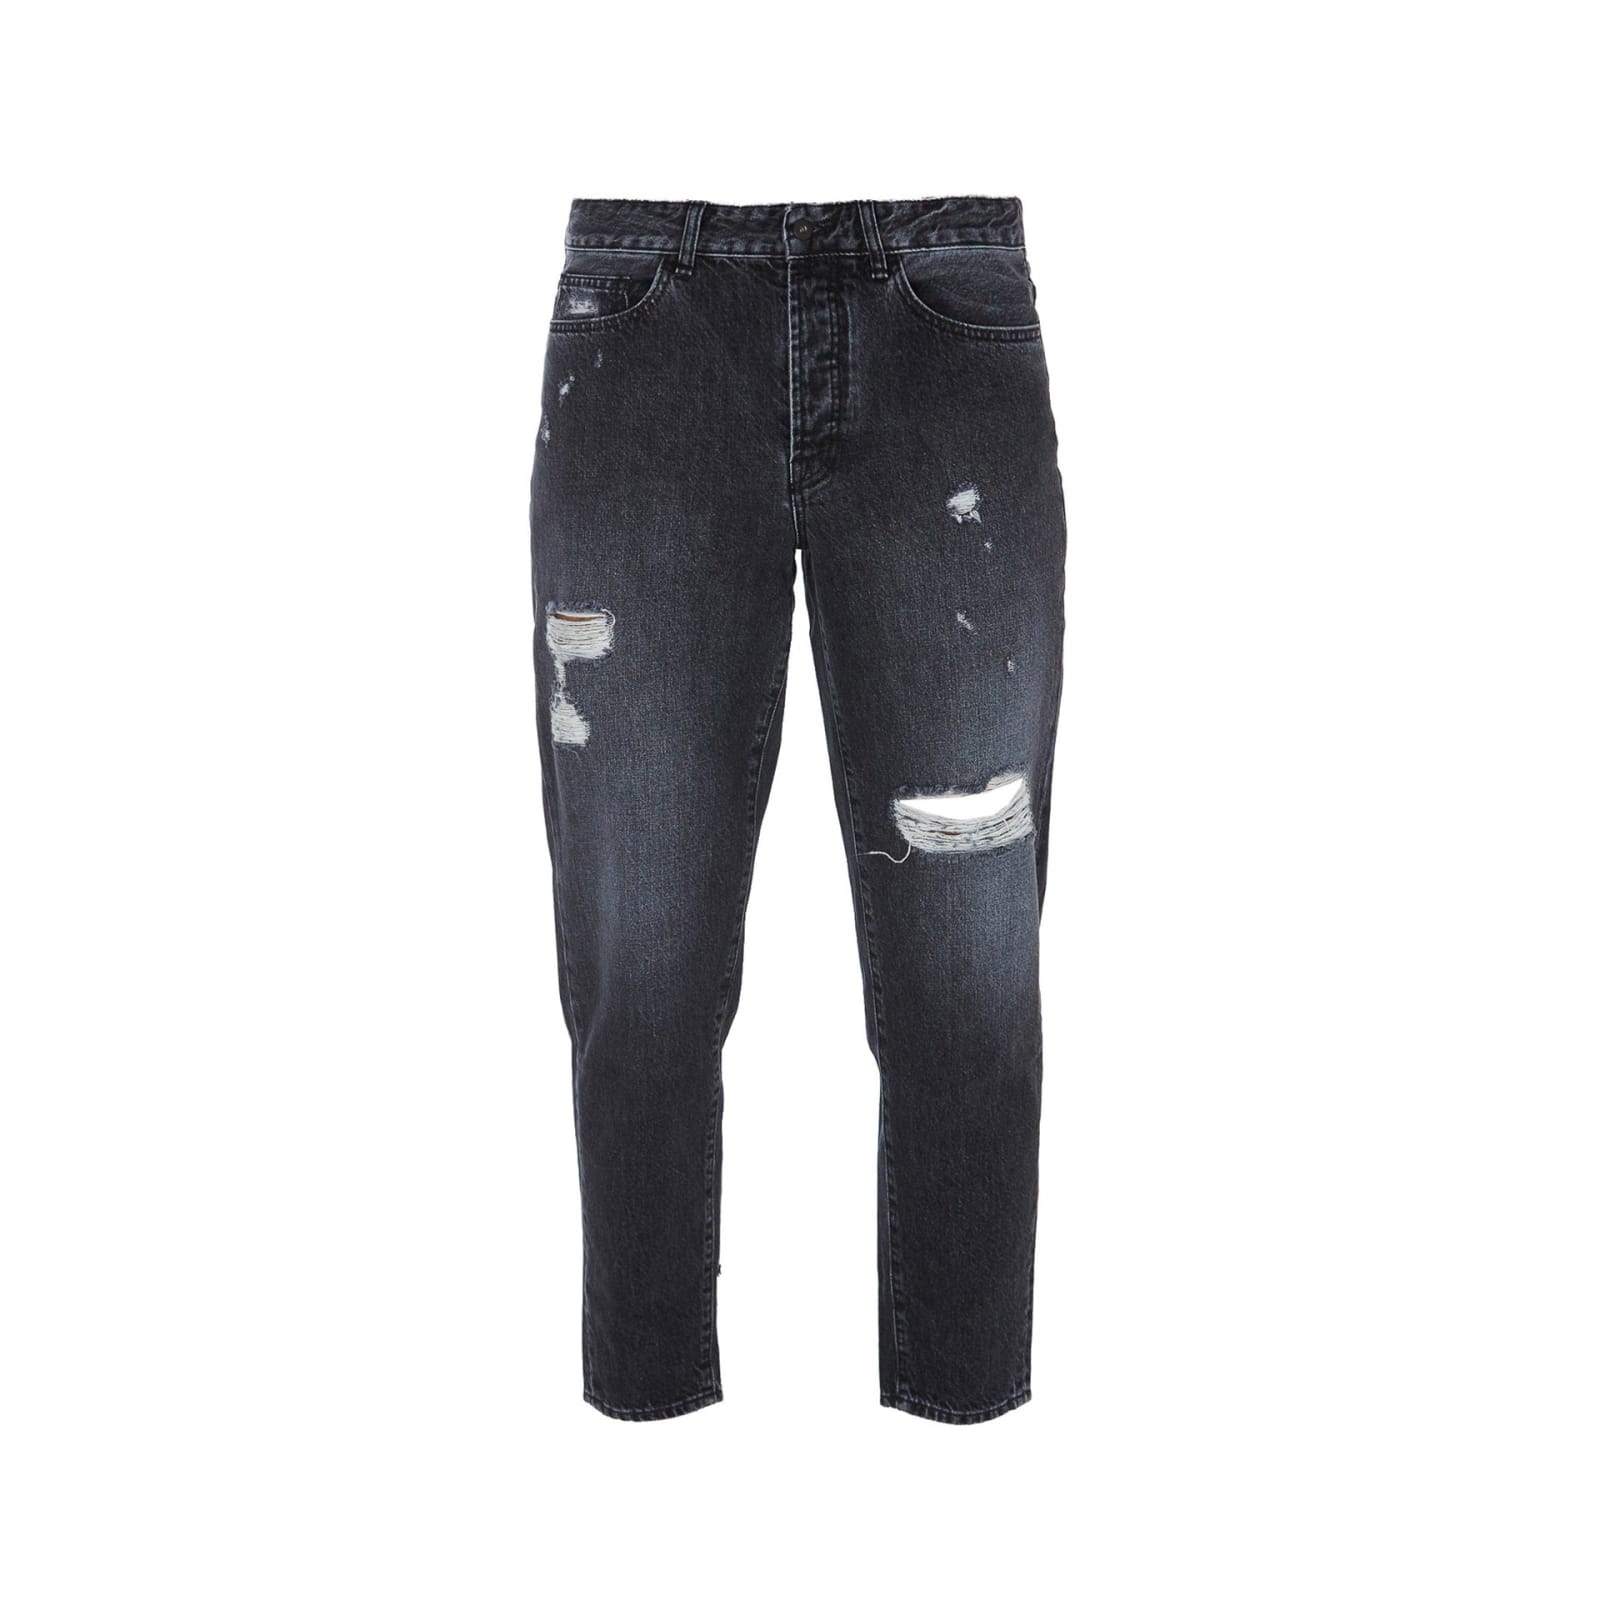 County Of Milan Distressed Denim Jeans